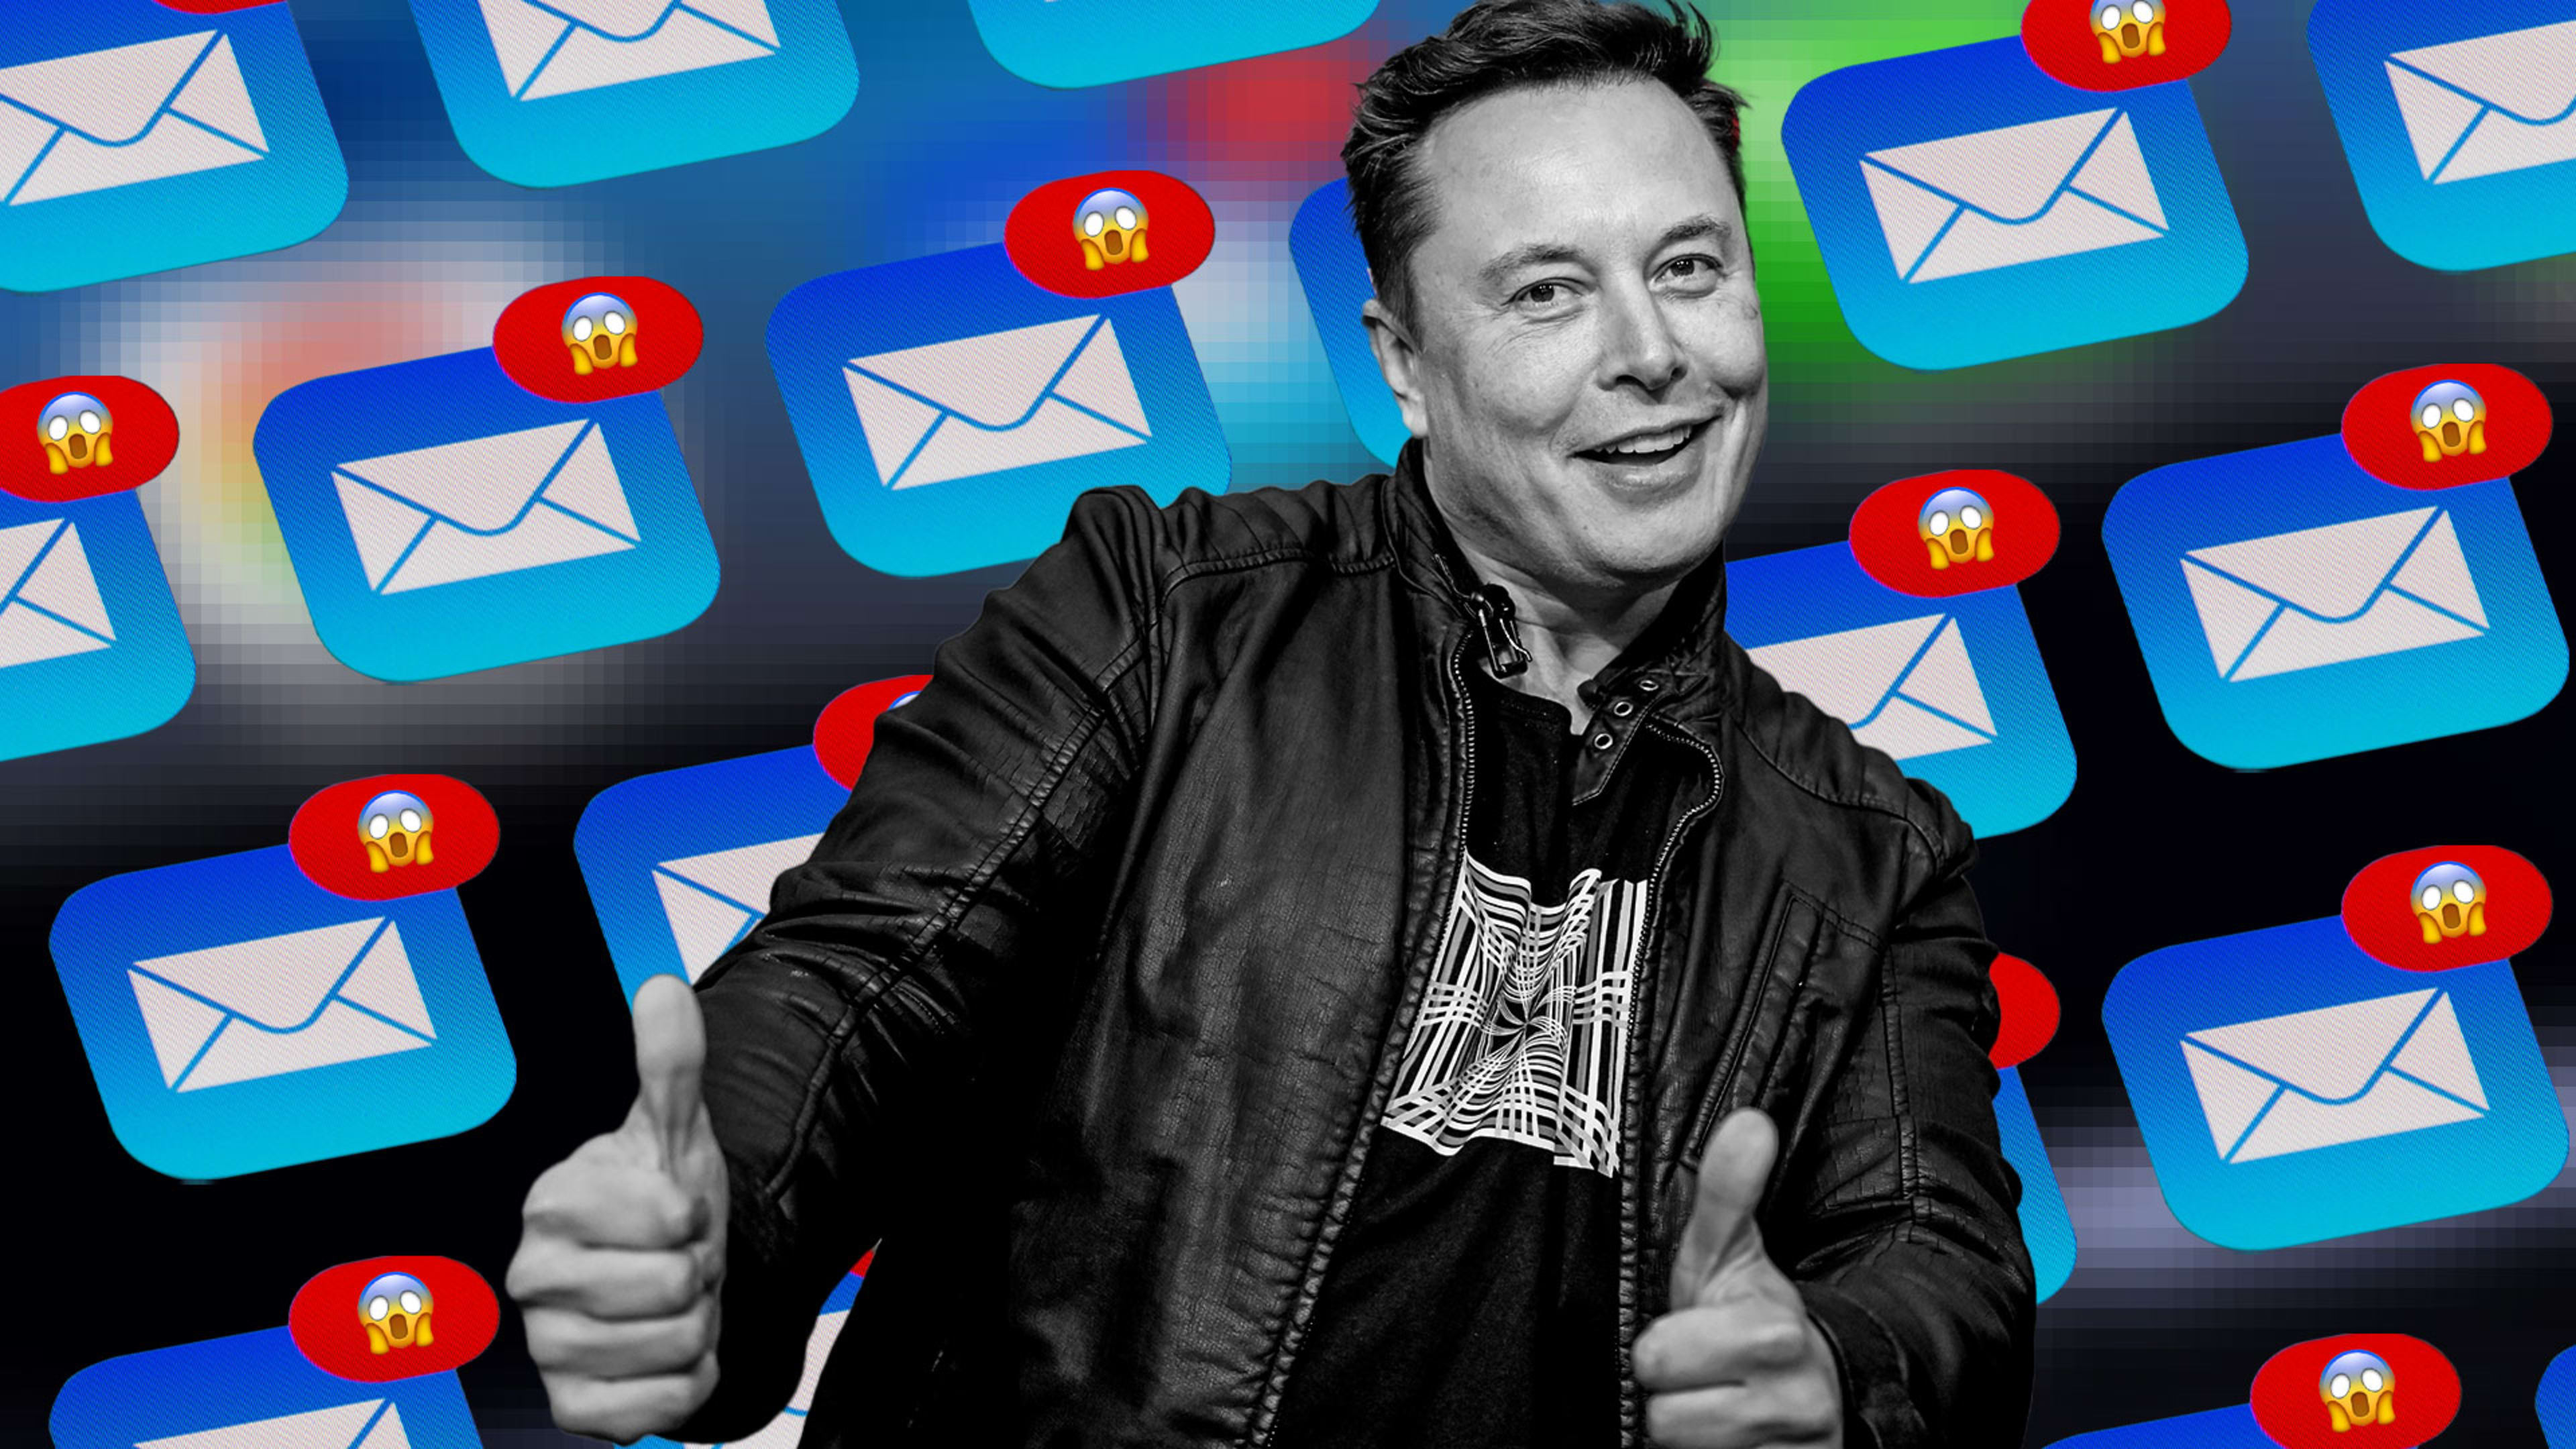 The email Elon Musk just sent to Twitter employees is a masterclass in how not to communicate